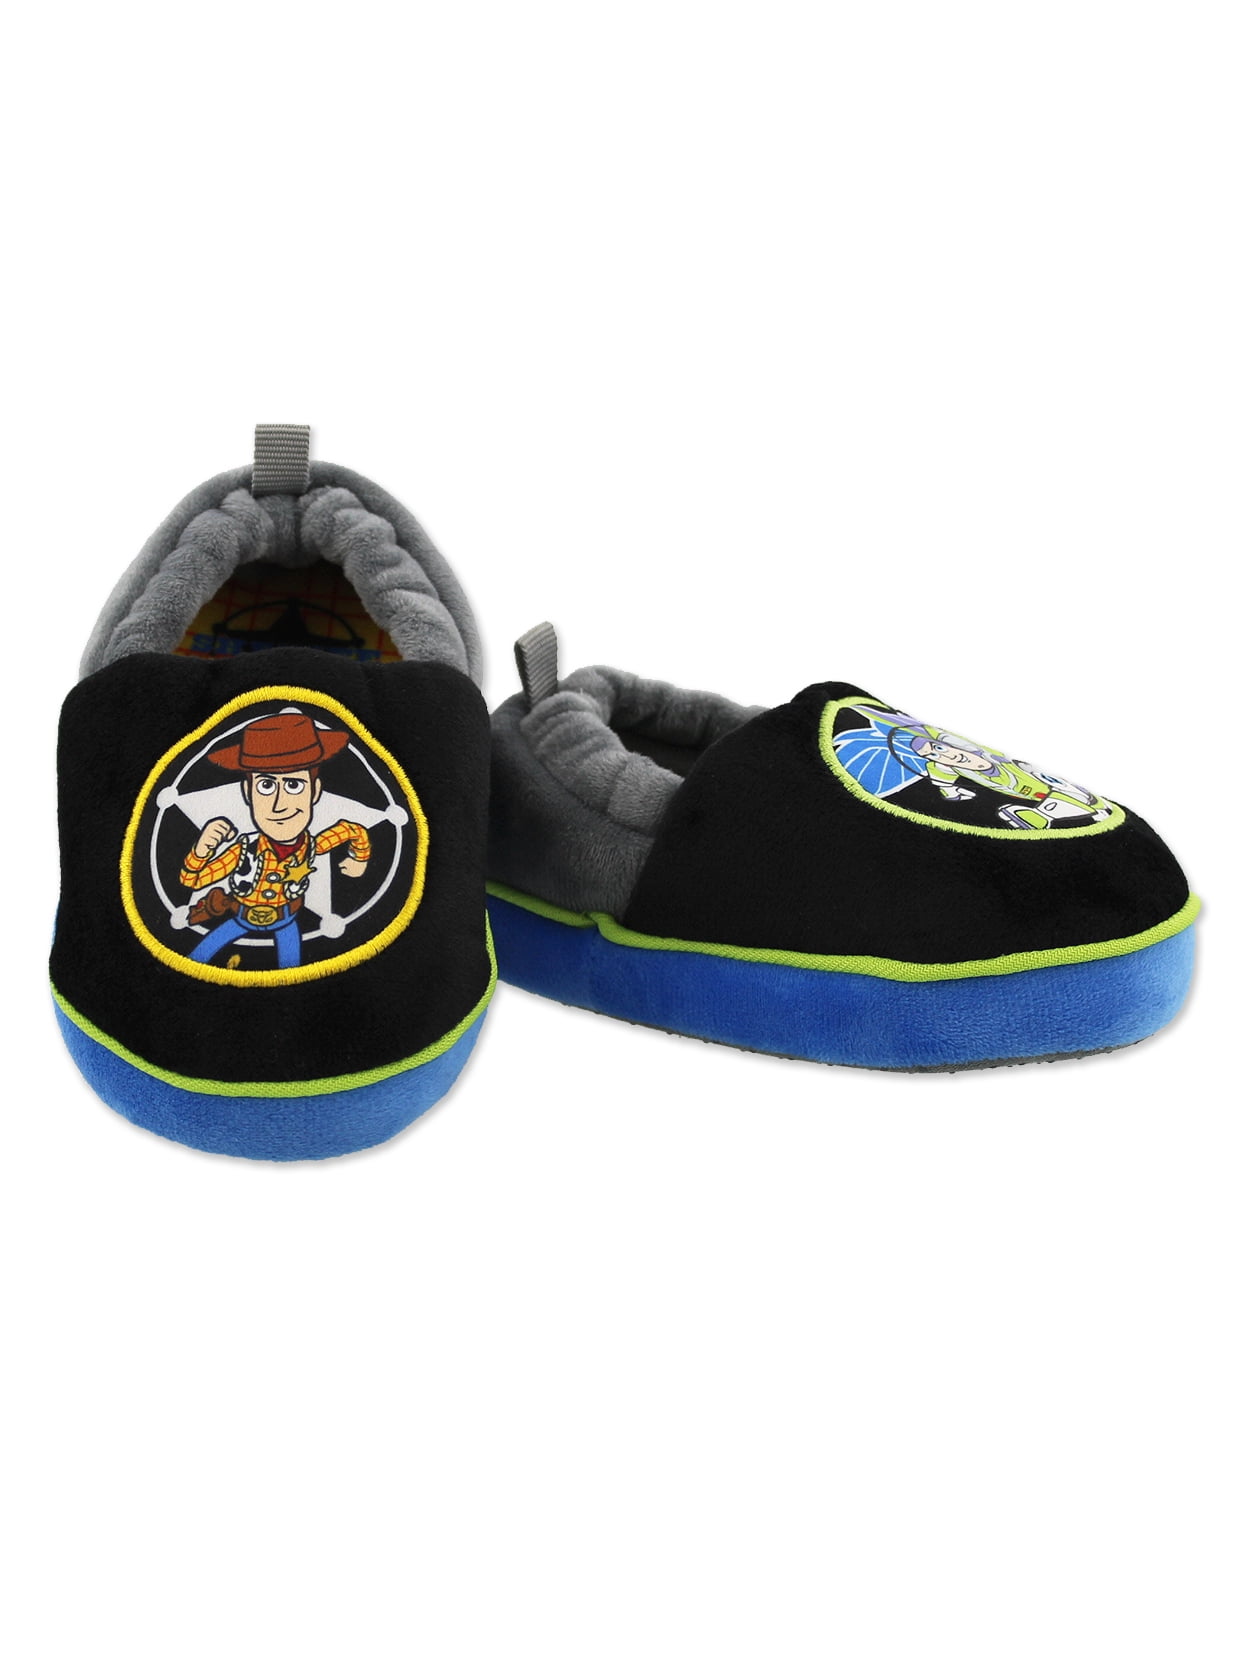 Toddler/Kid Disney Boys’ Toy Story Slippers Buzz and Woody Fuzzy Slippers 